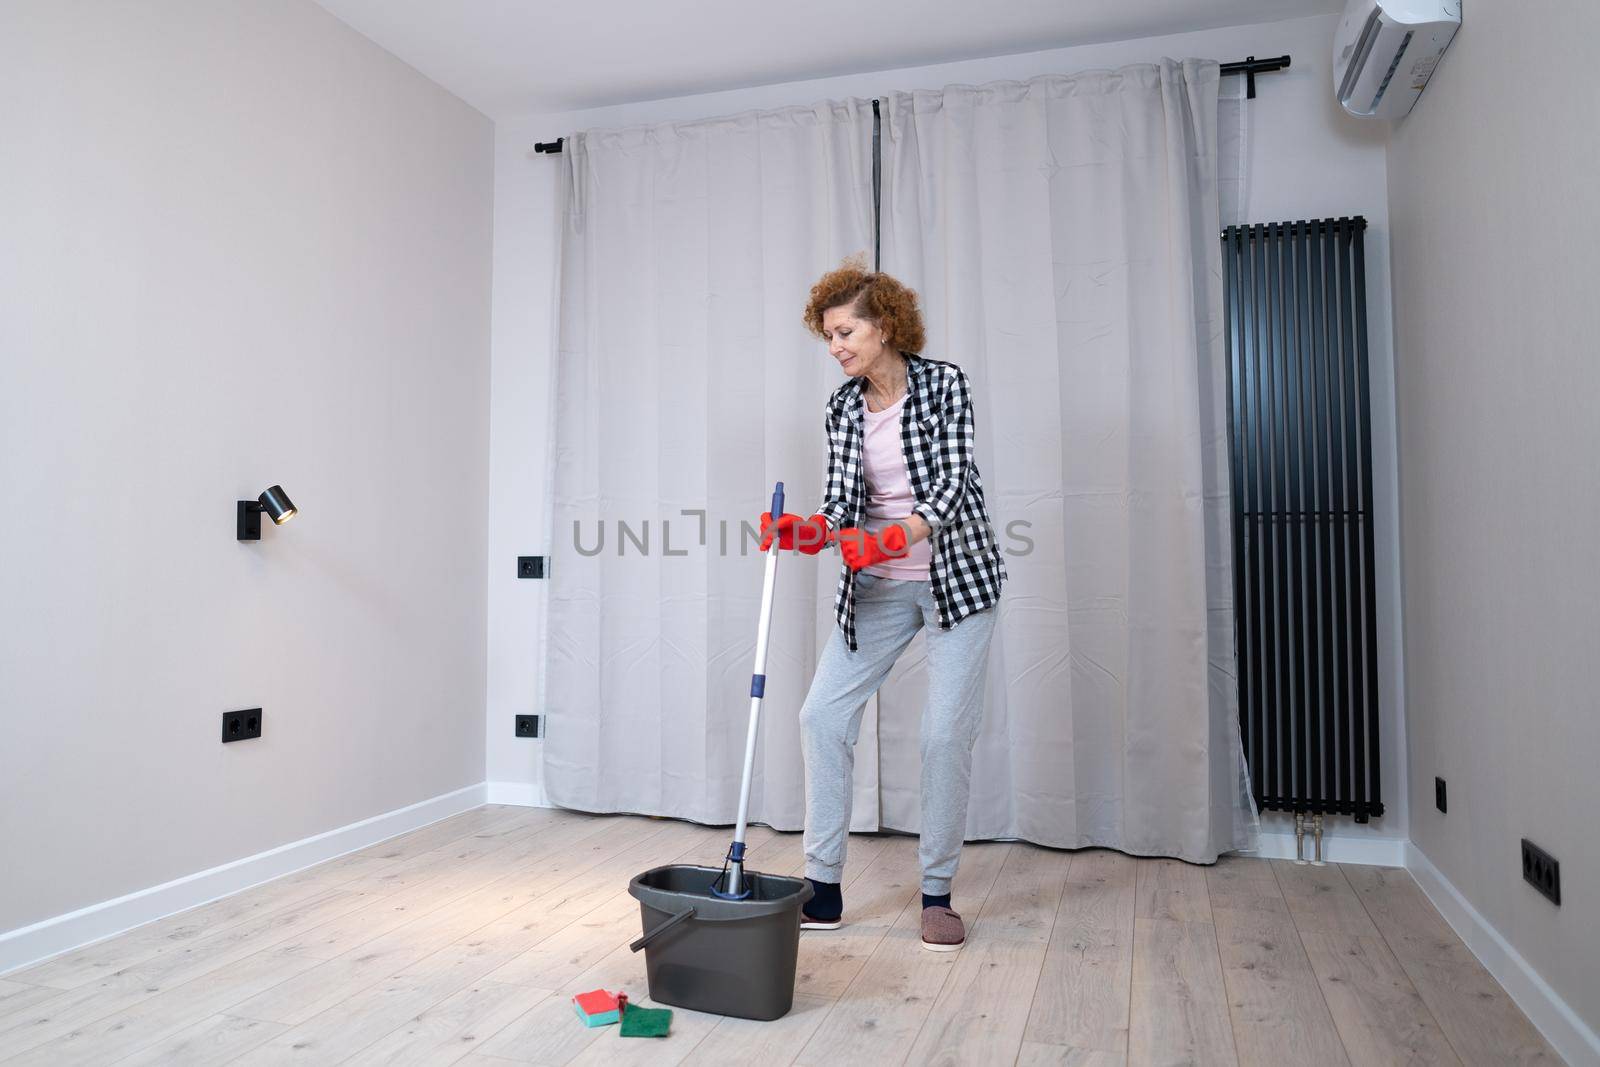 Happy mature woman mops the floor and dances and sings in a new unfurnished apartment before moving to a new house. Housewife enjoying domestic chores, doing home cleanup creatively by Tomashevska